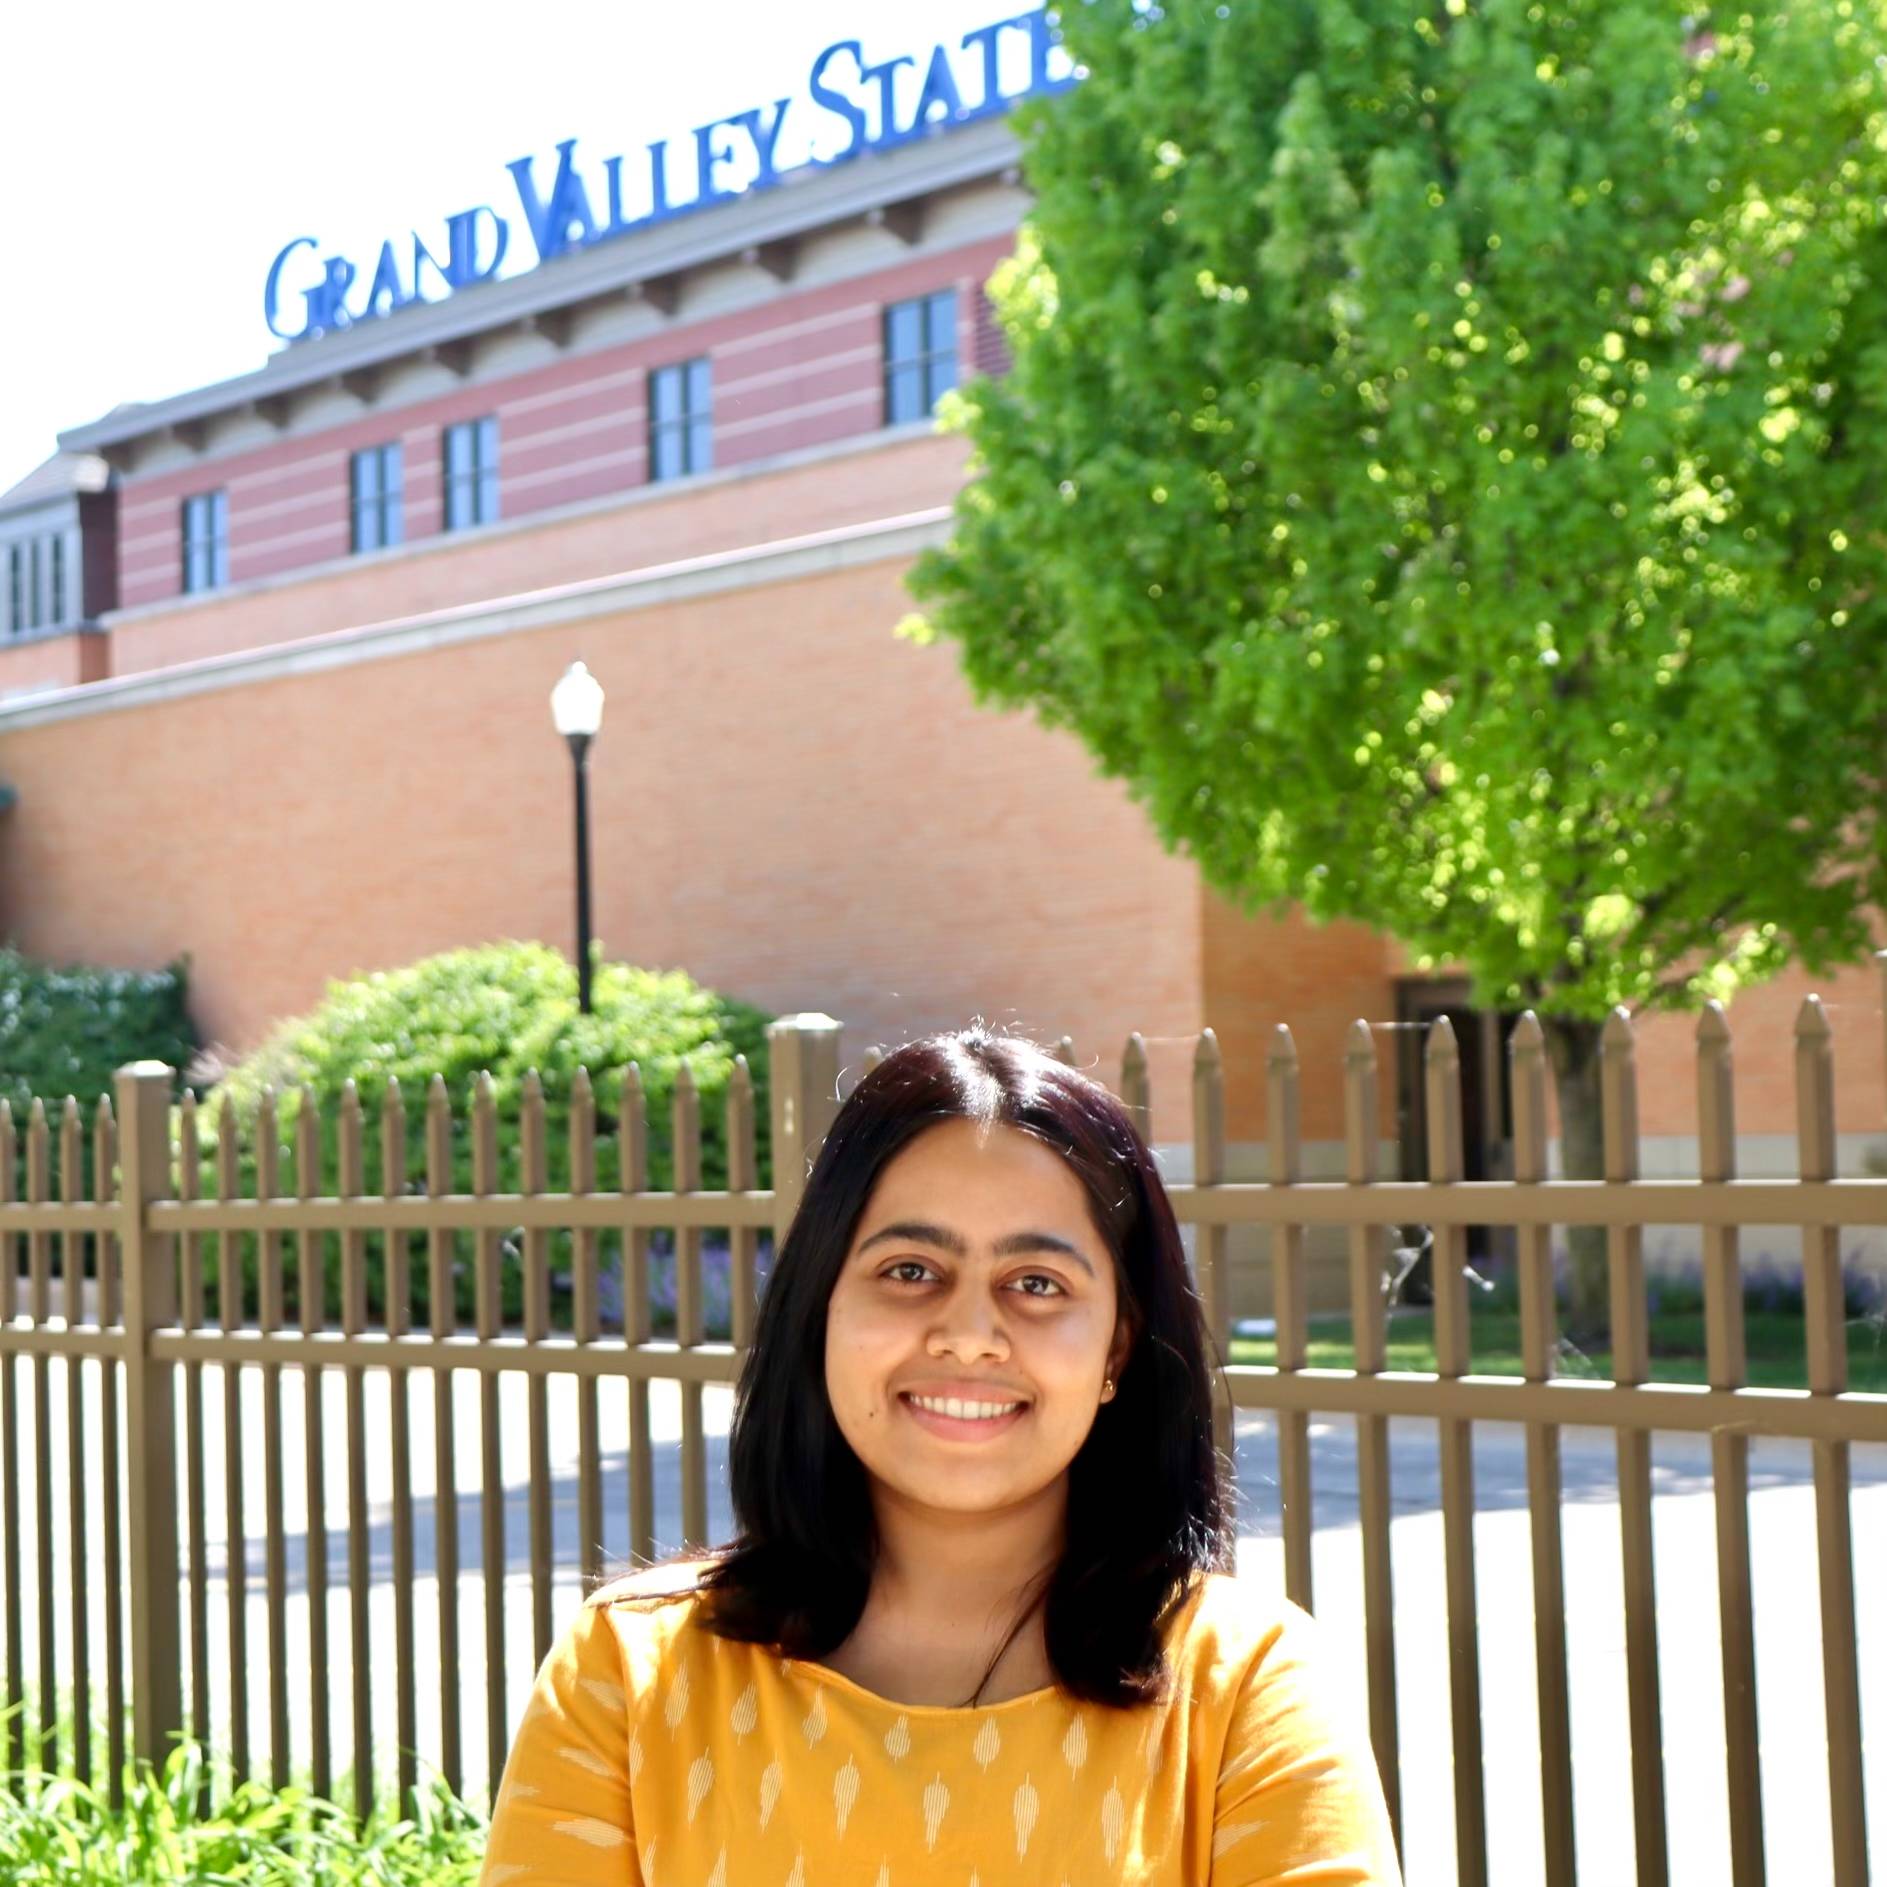 College of Health Professions Student Services student worker, Sunanda, smiling, stands in front of a Grand Valley building in the summer with a yellow shirt.